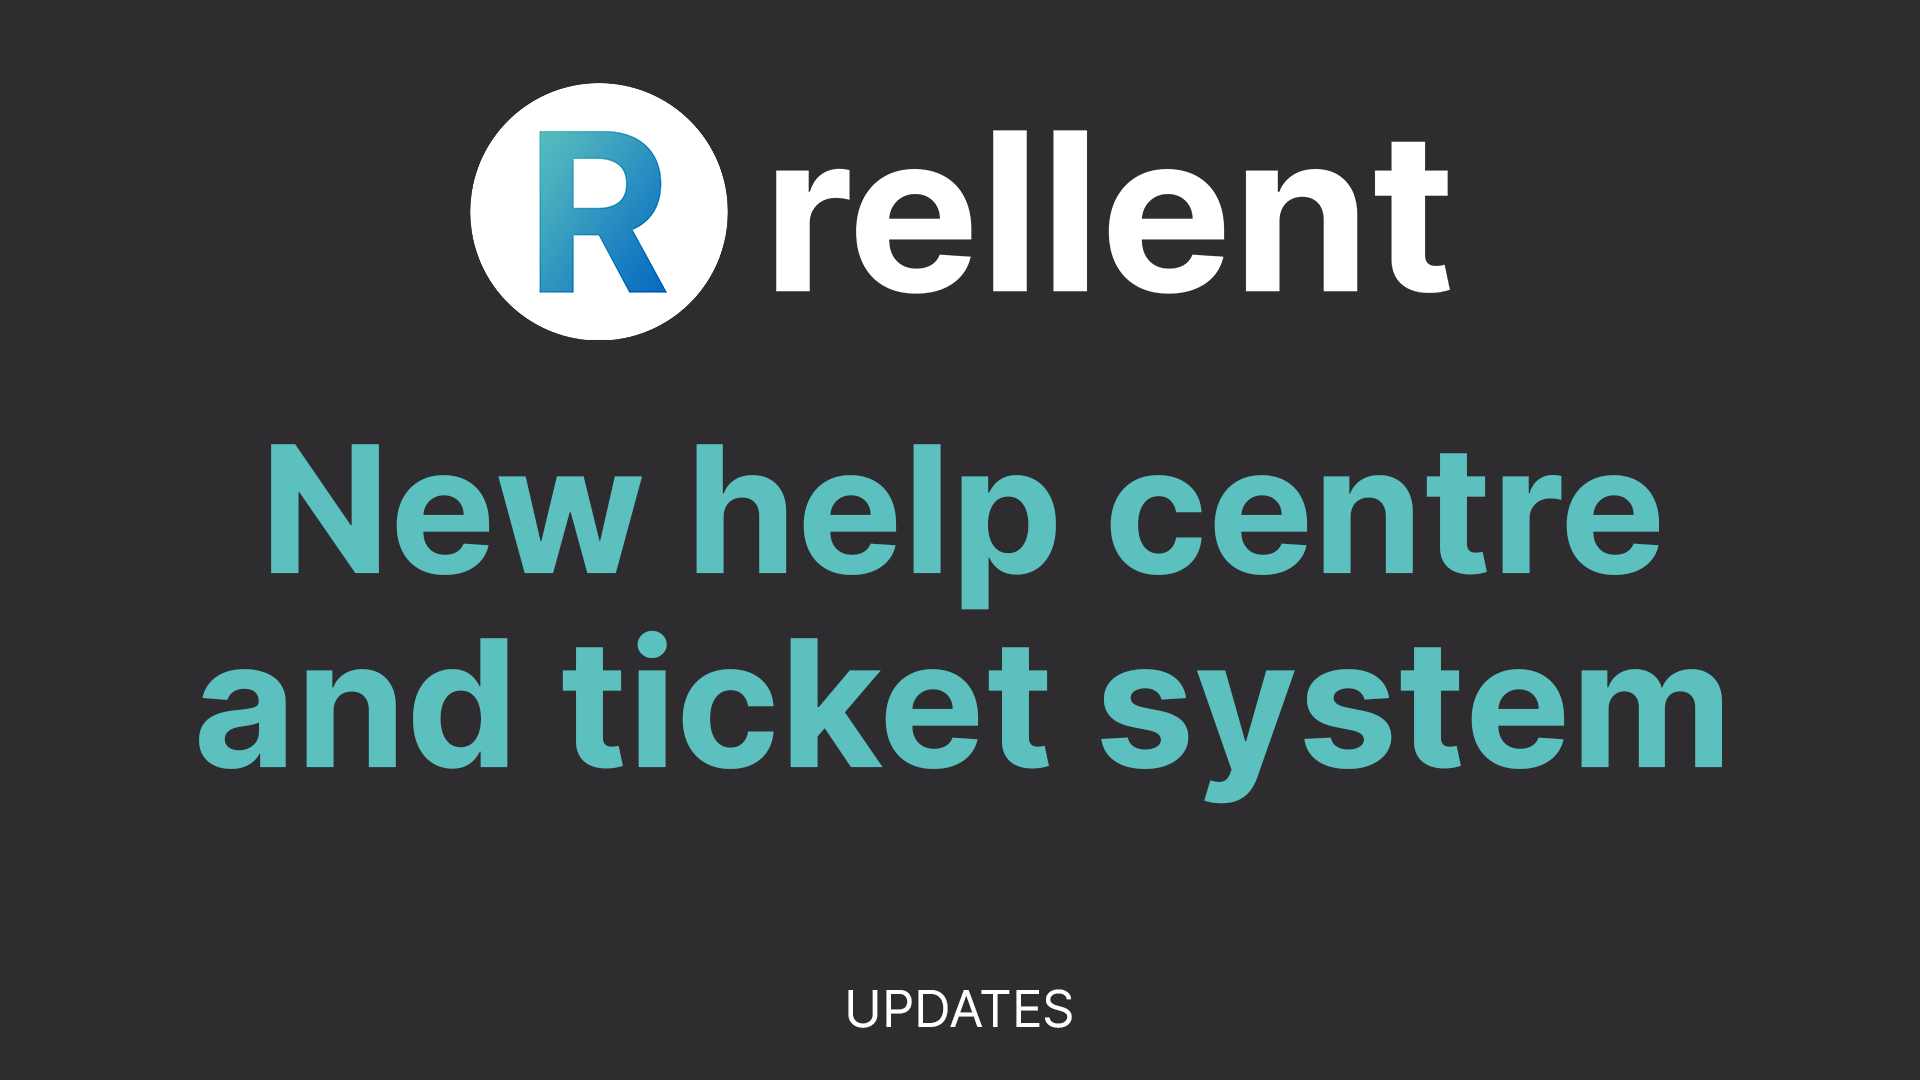 New help centre and ticket system